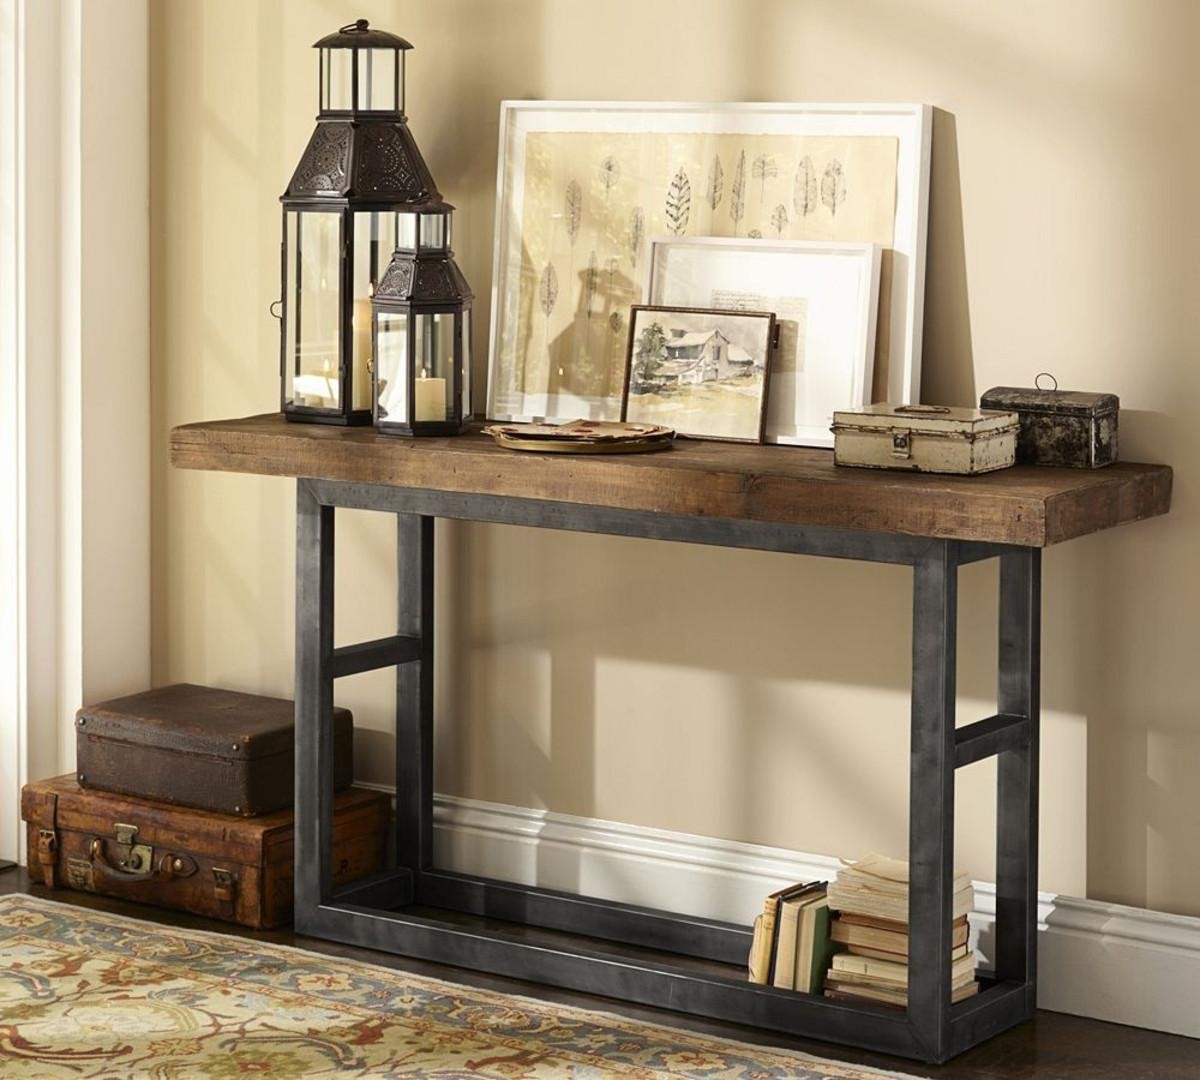 Reclaimed wood wrought iron console table traditional coffee tables